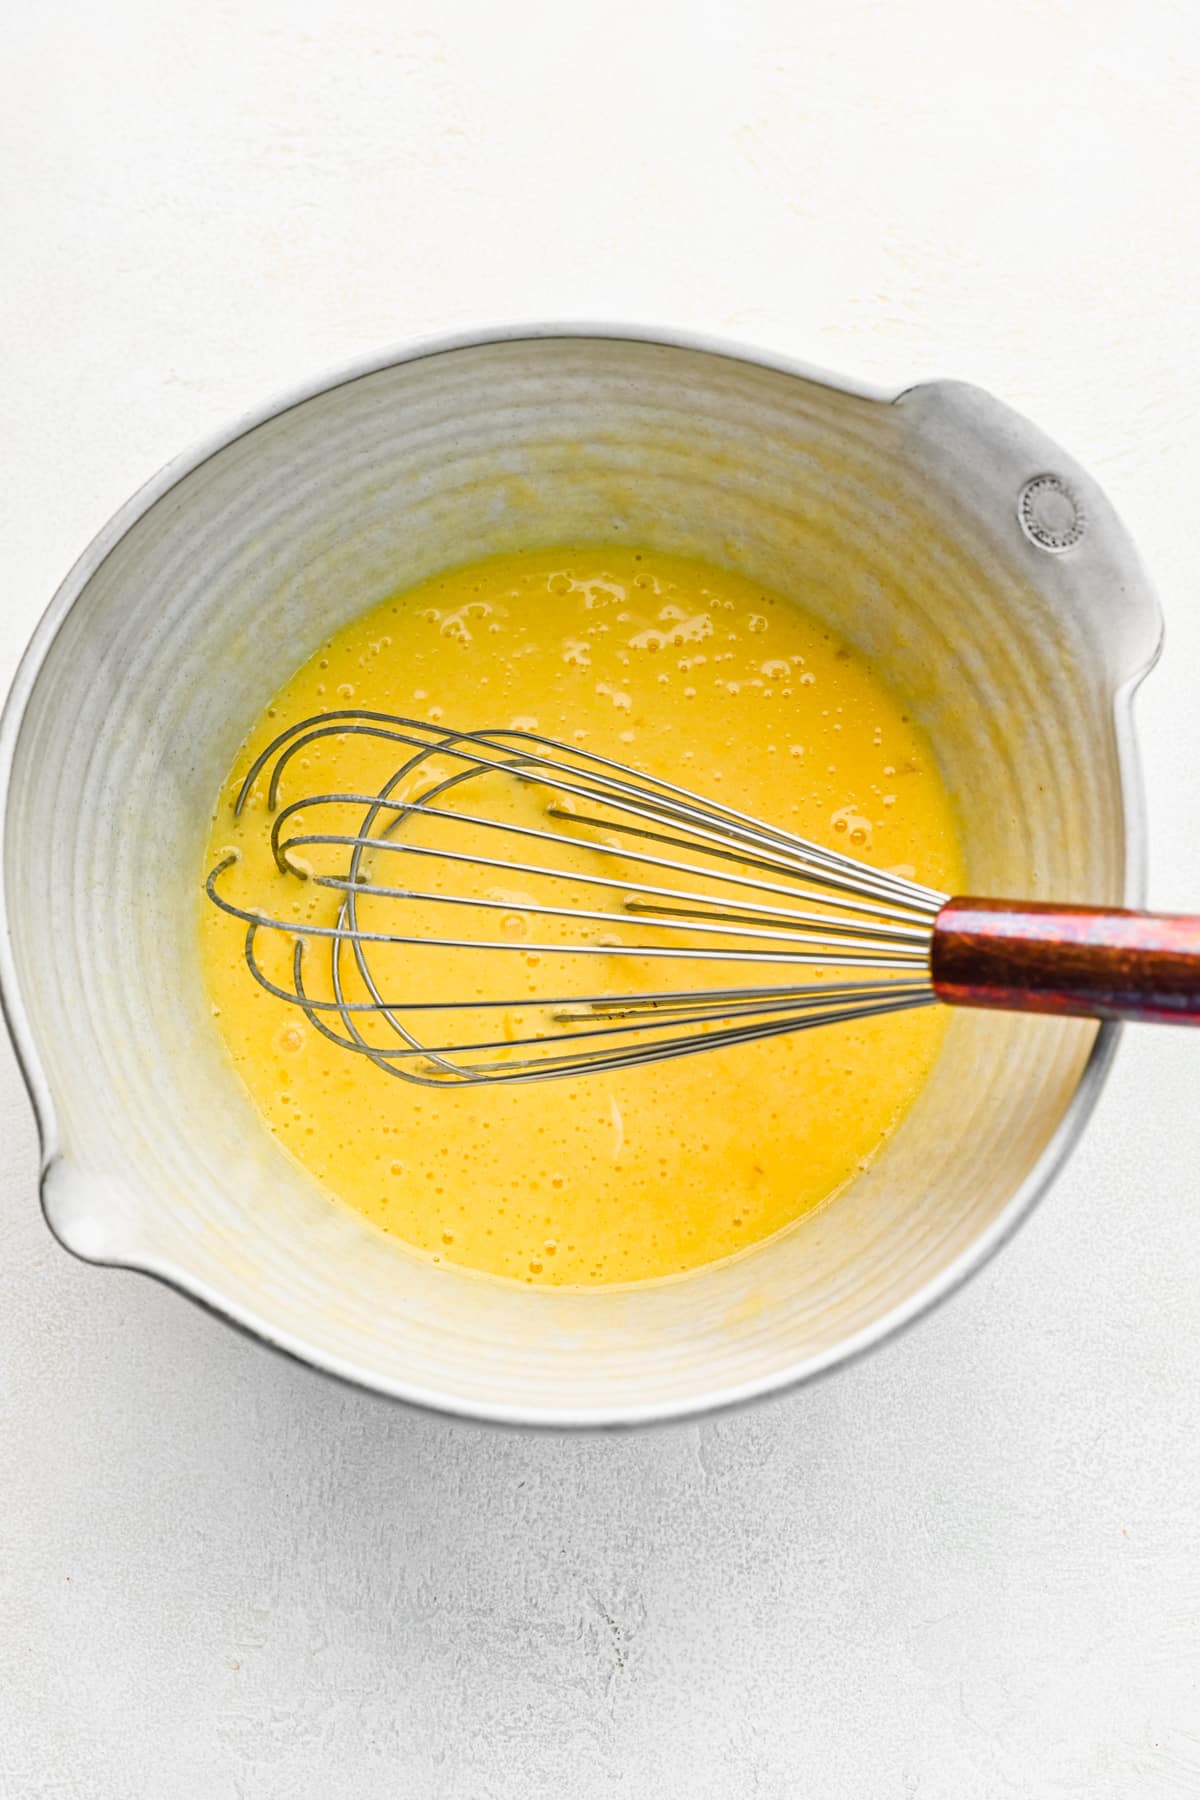 Eggs whisked into oil and buttermilk in a mixing bowl. 